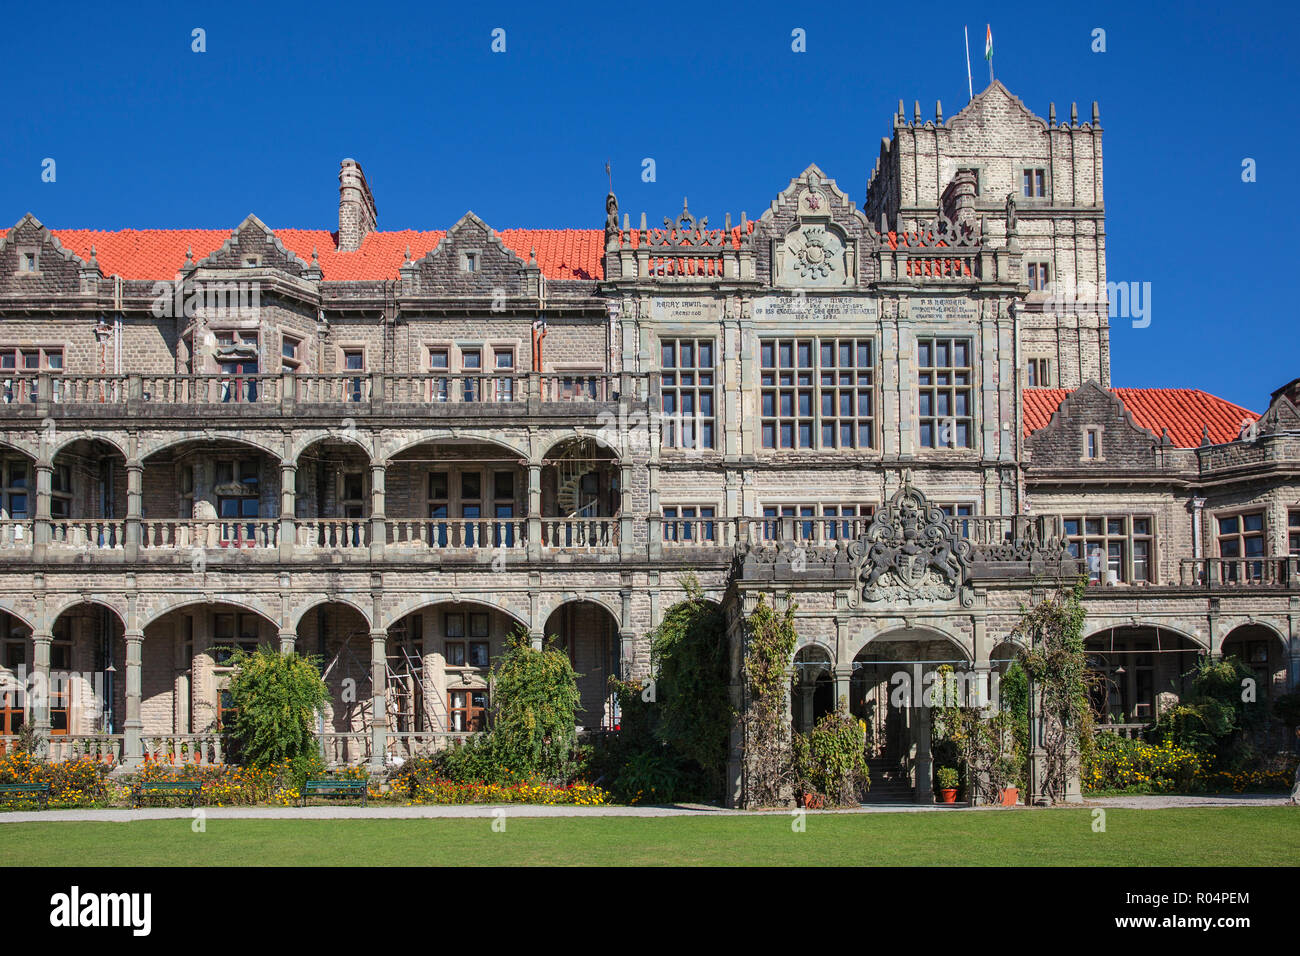 The Former Viceregal Lodge, formerly the residence of the British Viceroy of India, Shimla (Simla), Himachal Pradesh, India, Asia Stock Photo